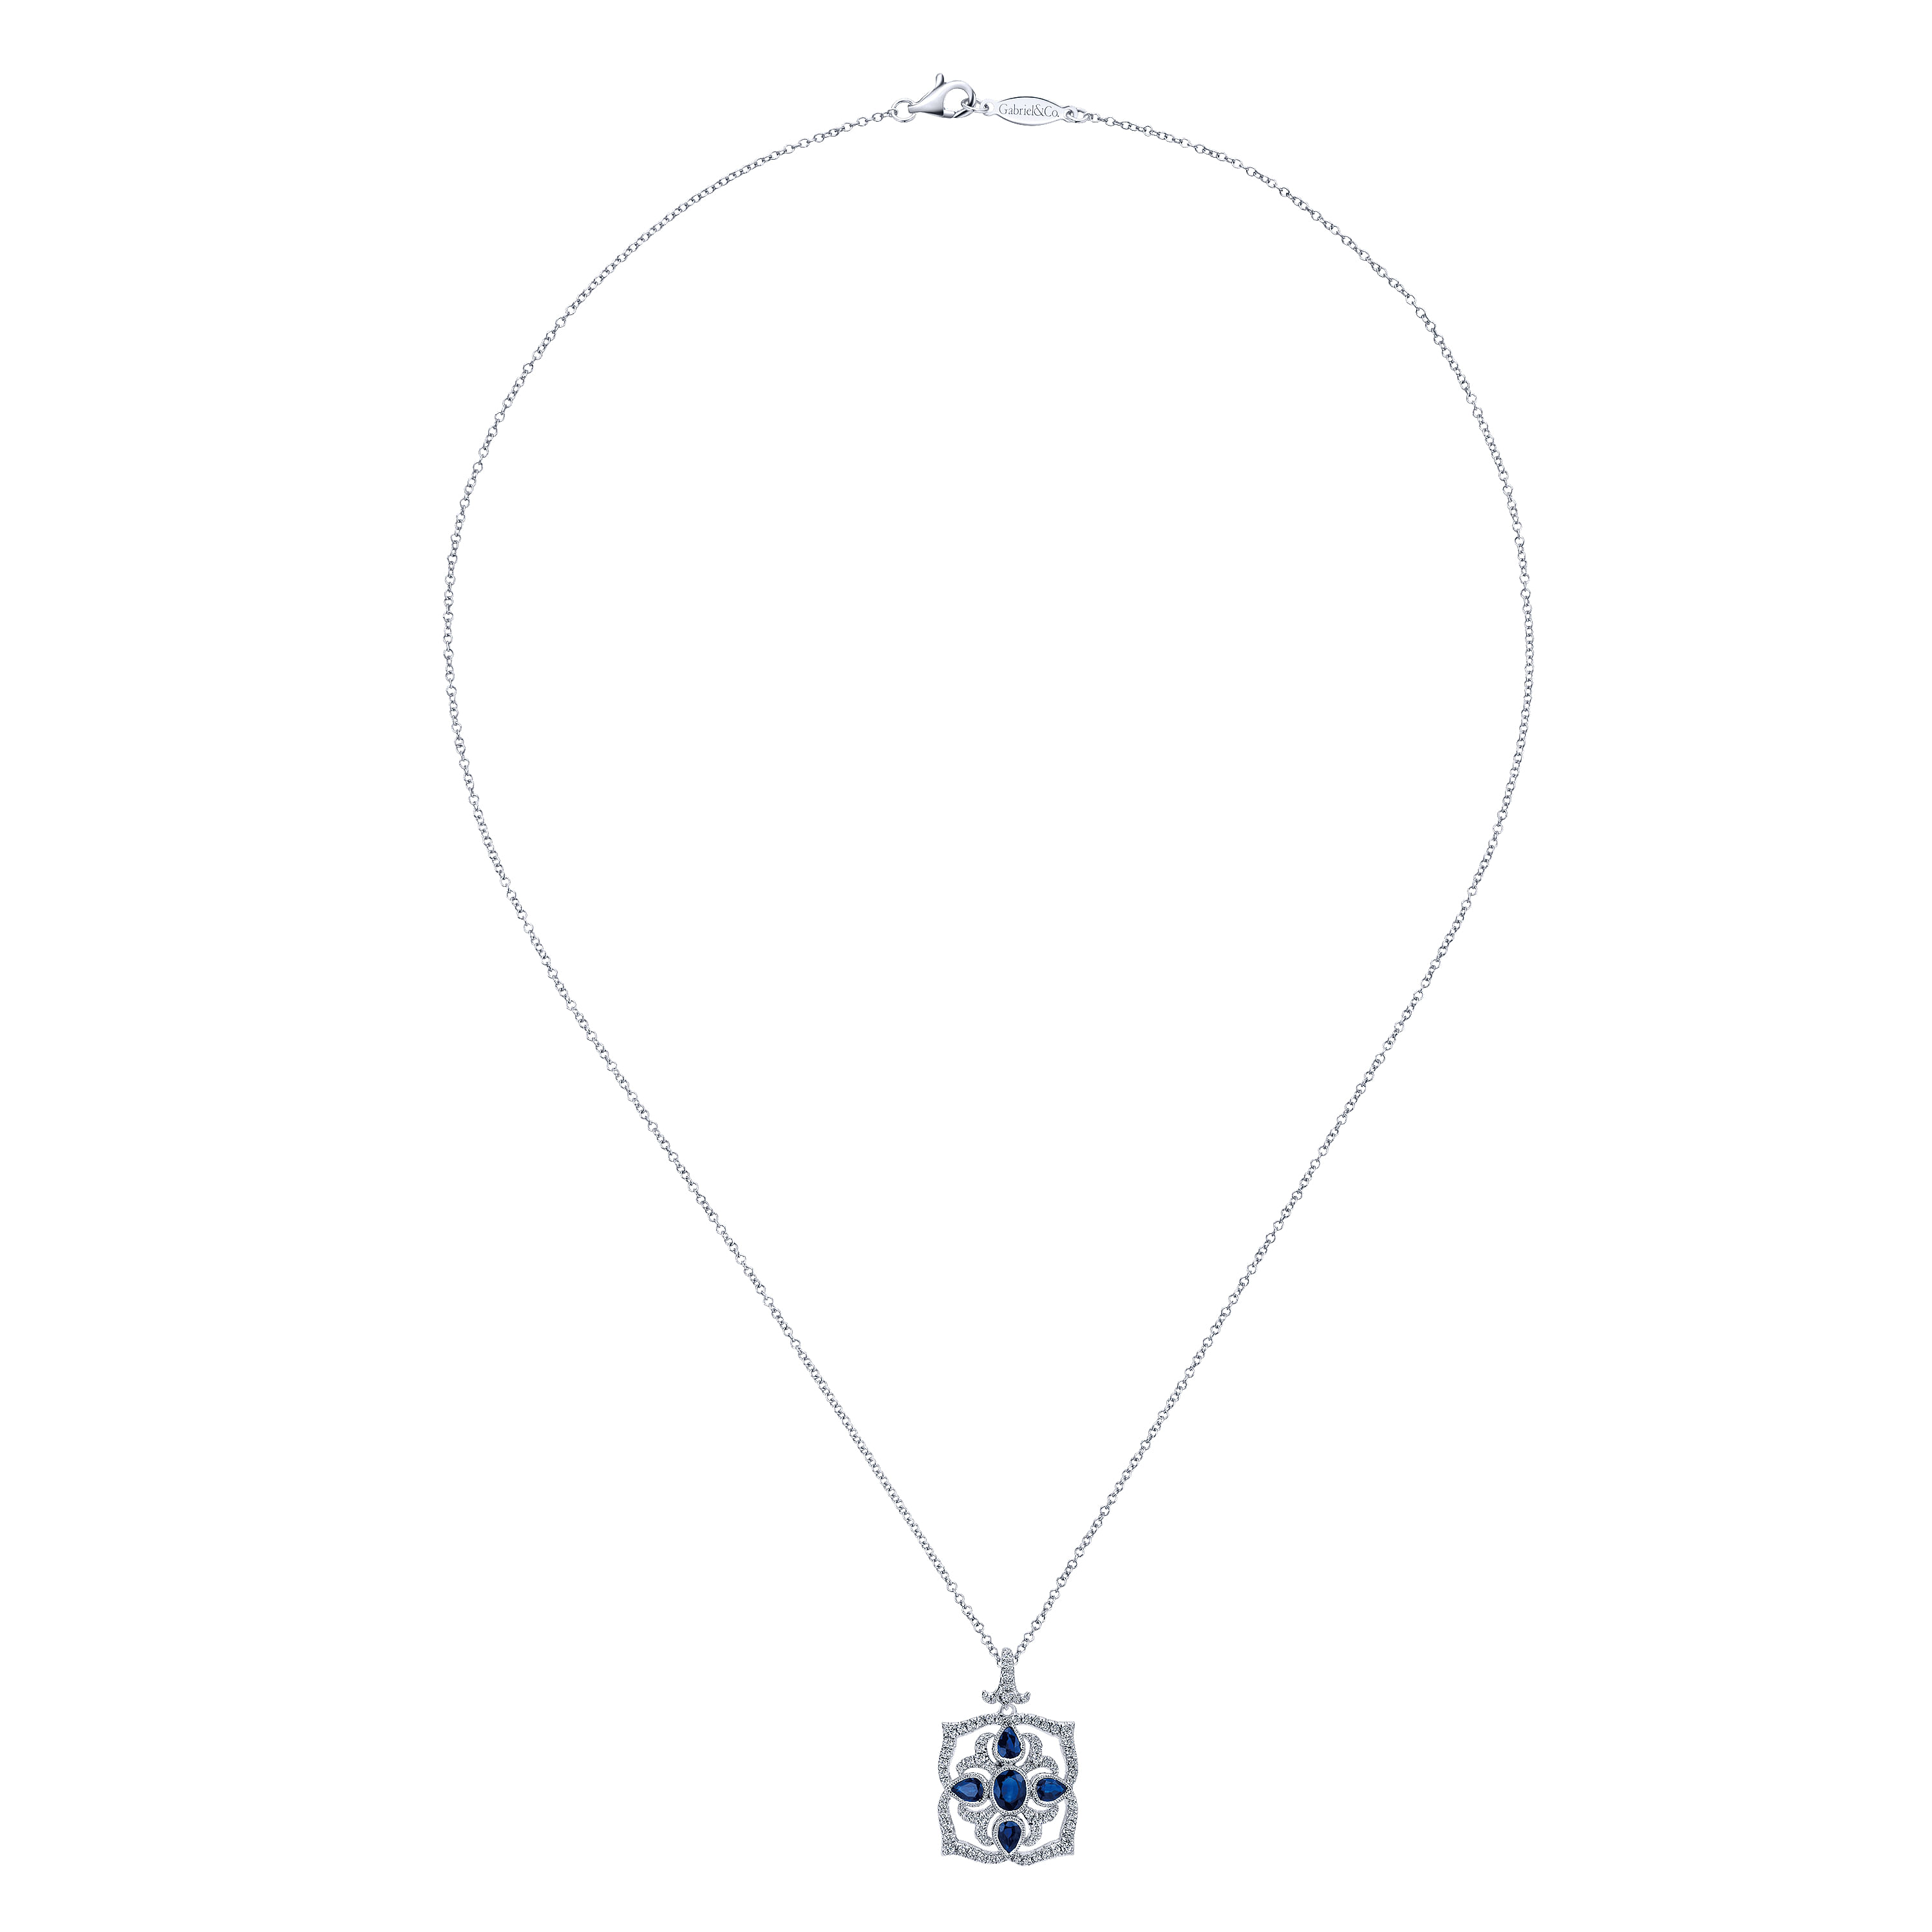 Vintage Inspired 14K White Gold Sapphire and Diamond Pendant Necklace